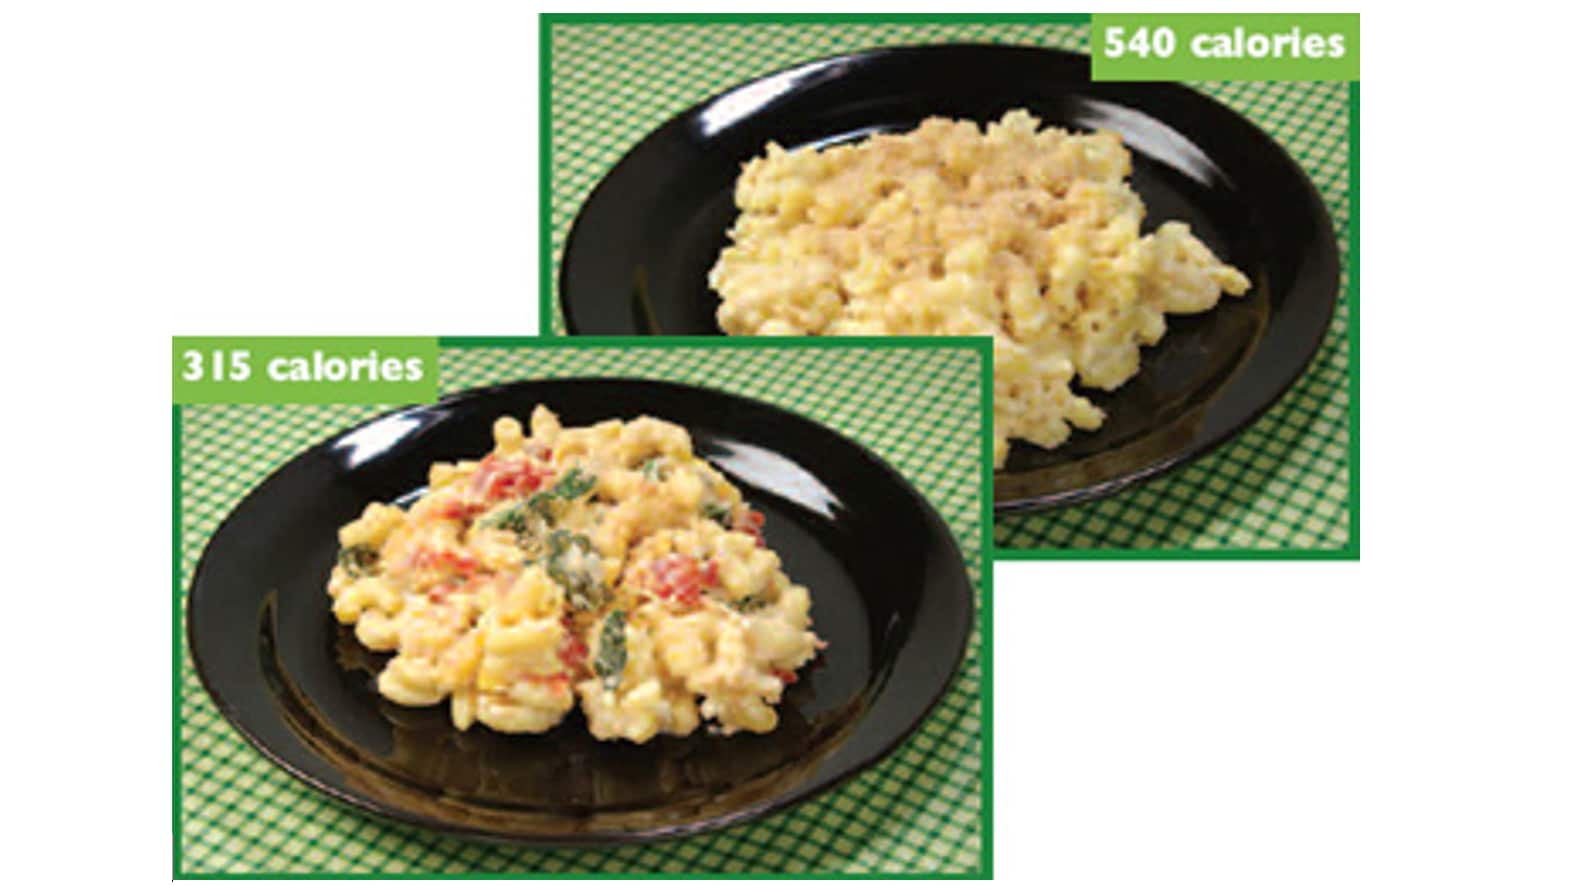 Traditional mac and cheese = 540 calories per serving; mac and cheese with healthier ingredients = 315 calories per serving.